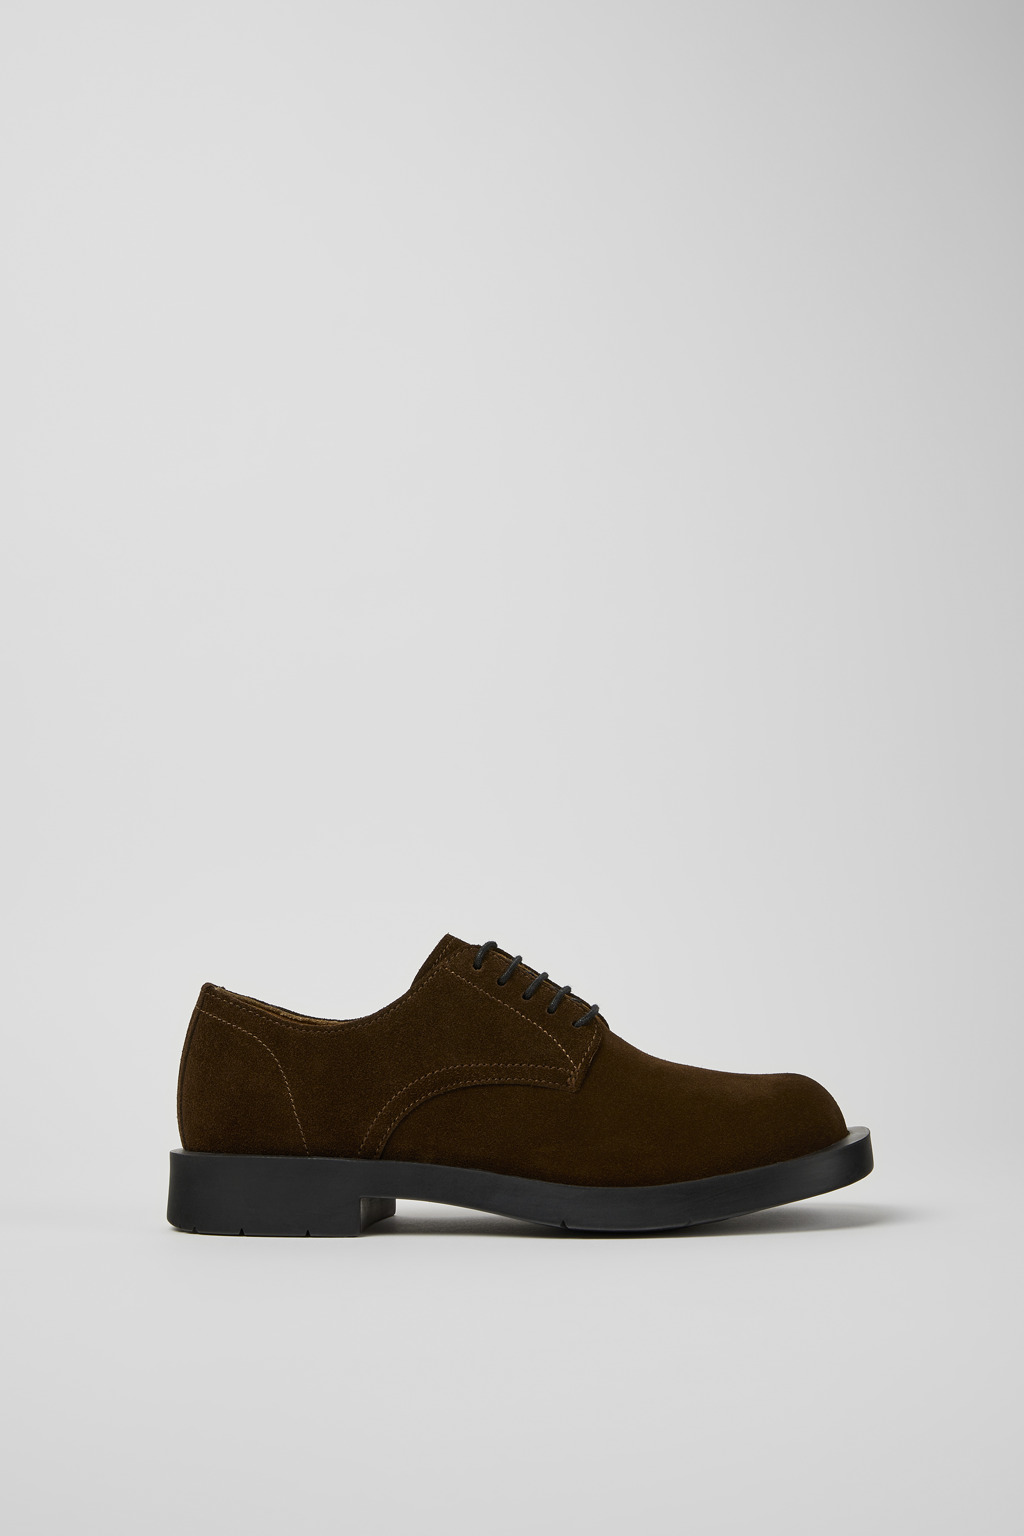 Neuman Brown Formal Shoes for Women - Fall/Winter collection 